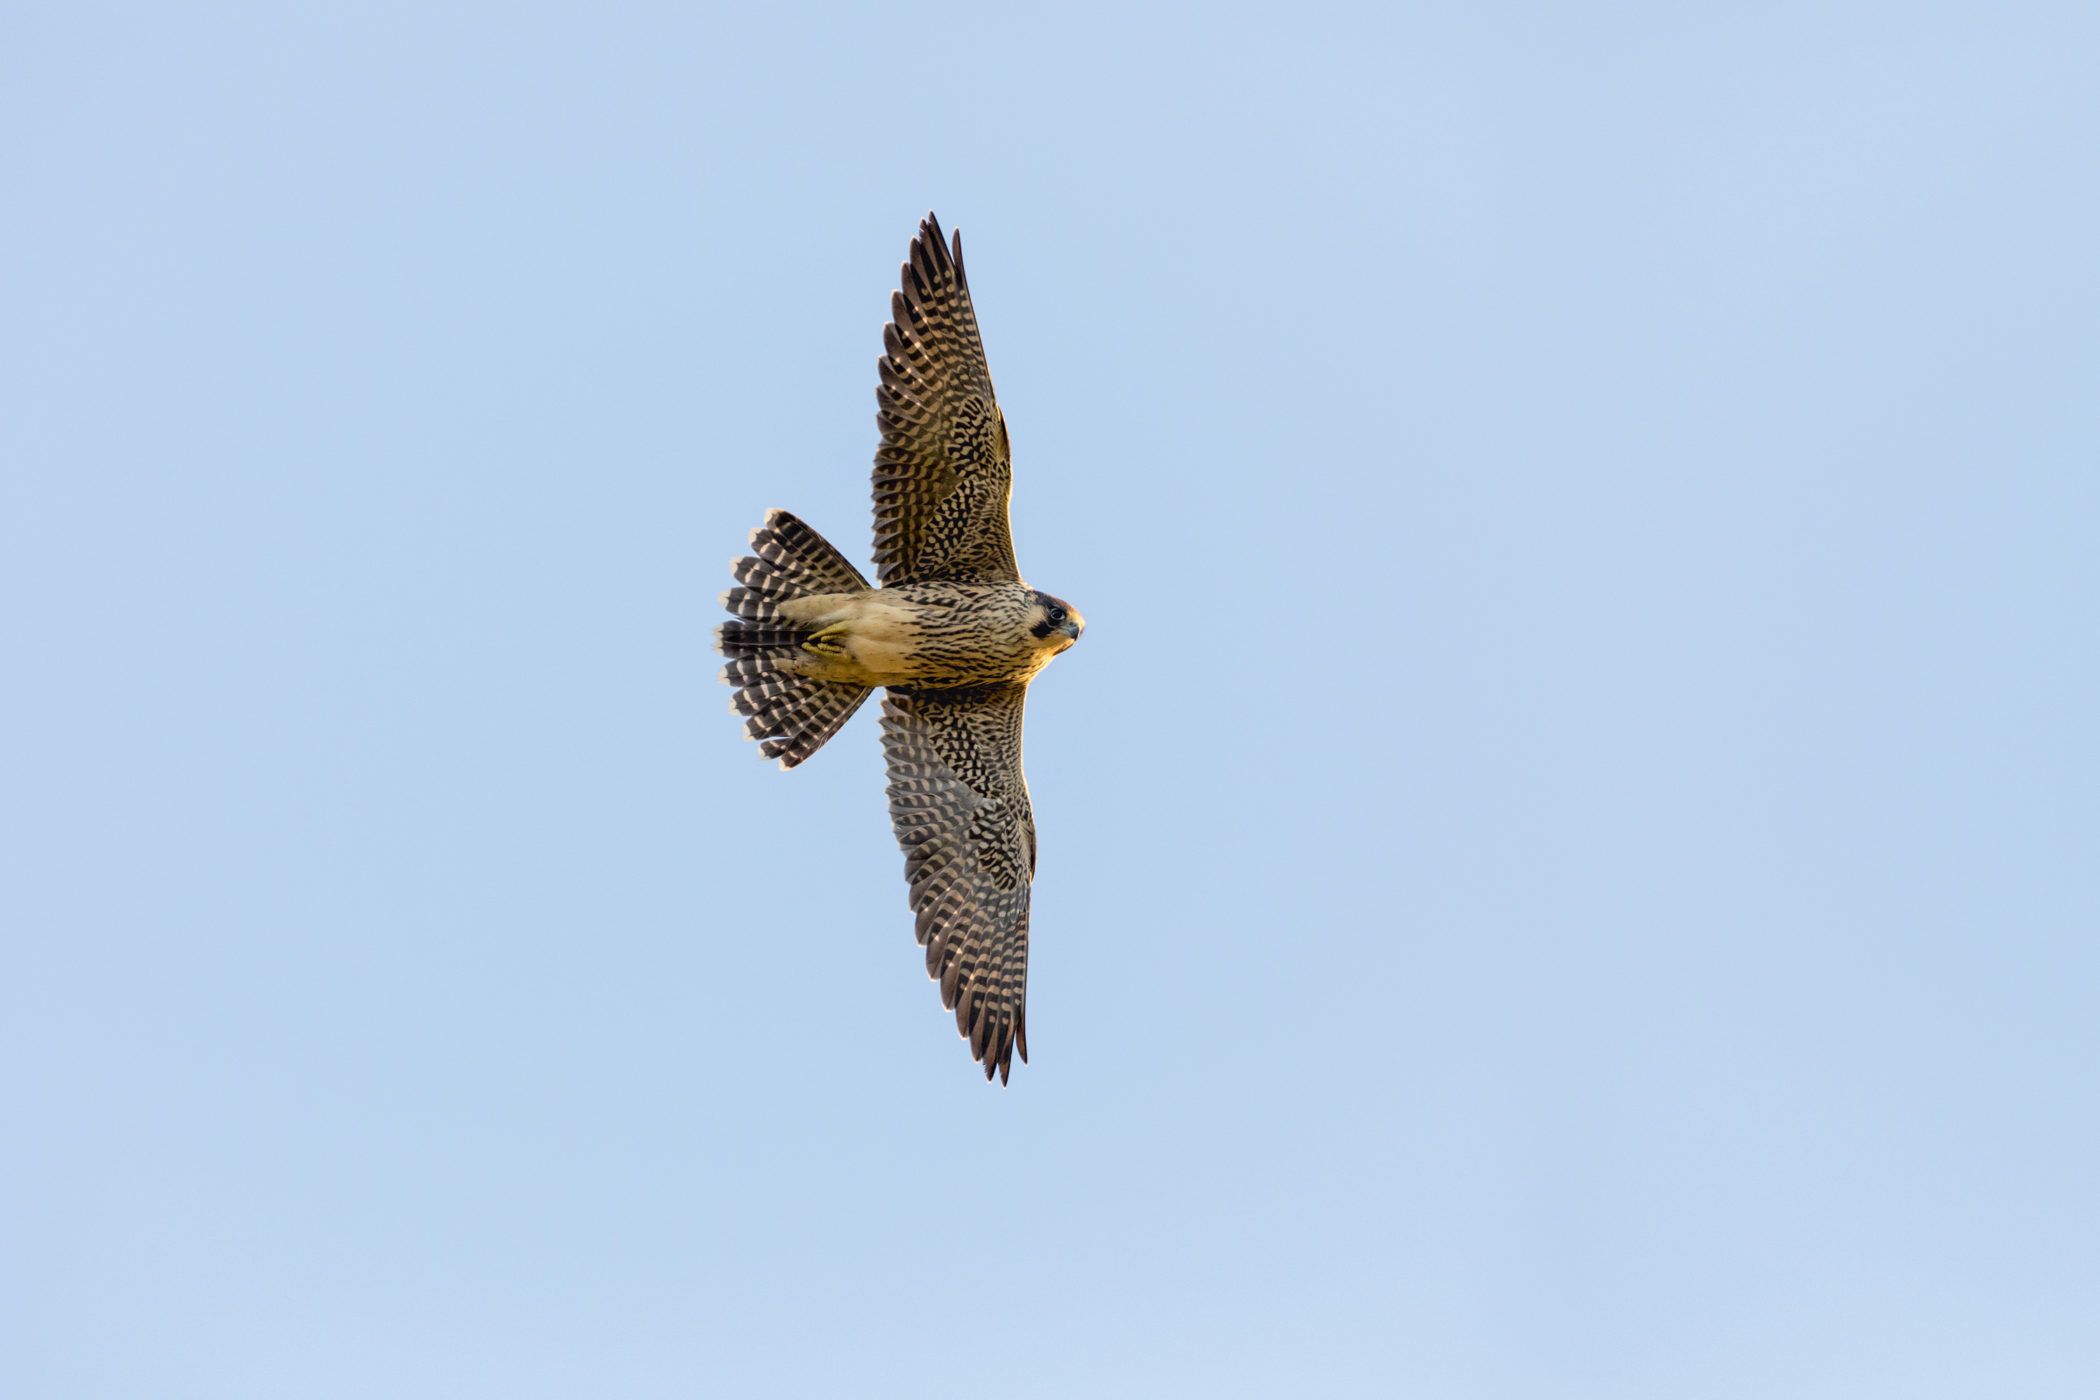 Peregrines can be seen hunting over the estuary, this is a young bird. Credit: David Chapman